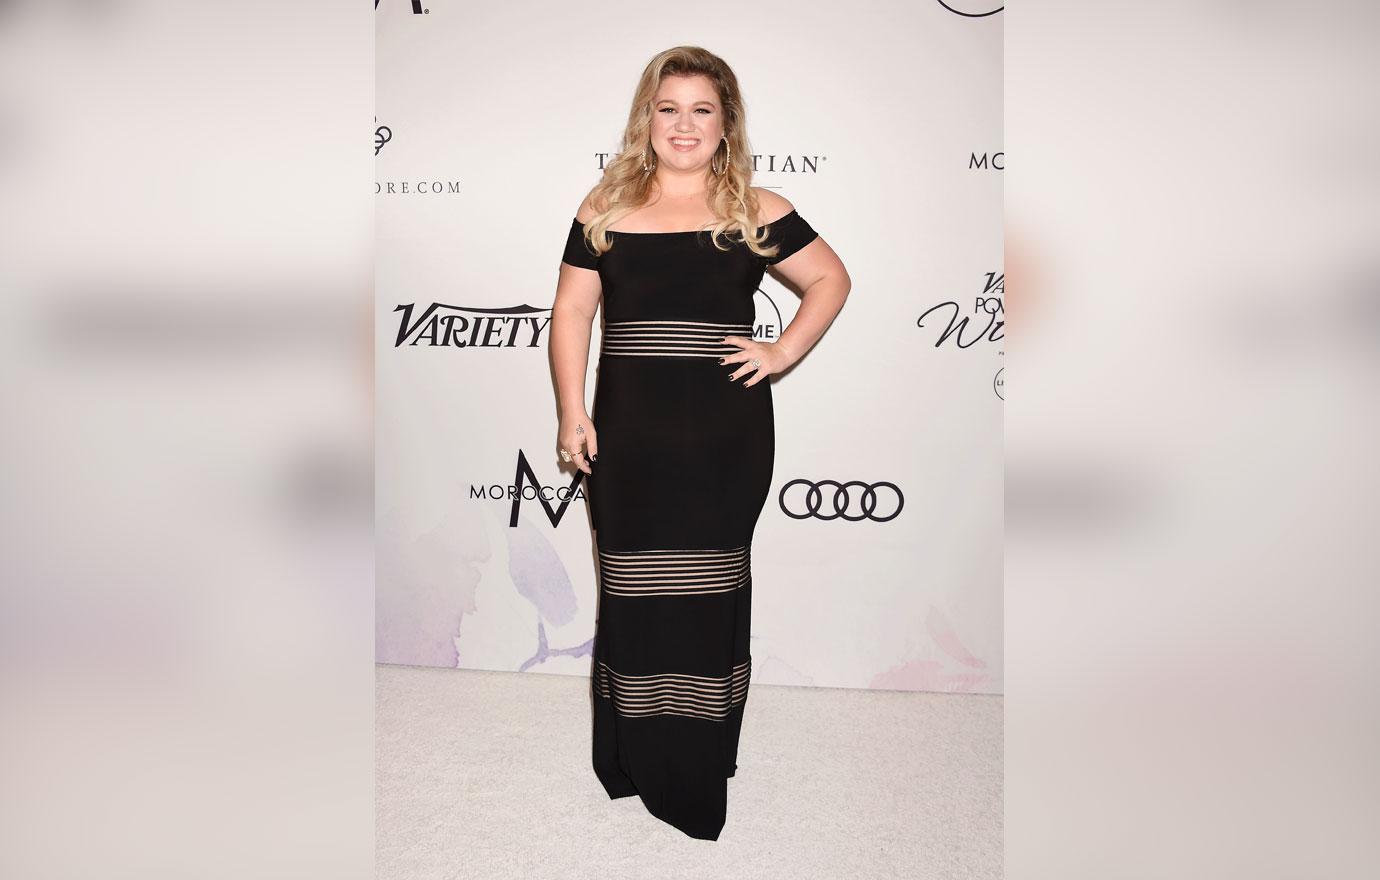 Kelly Clarkson Loses Weight Before And After Pics